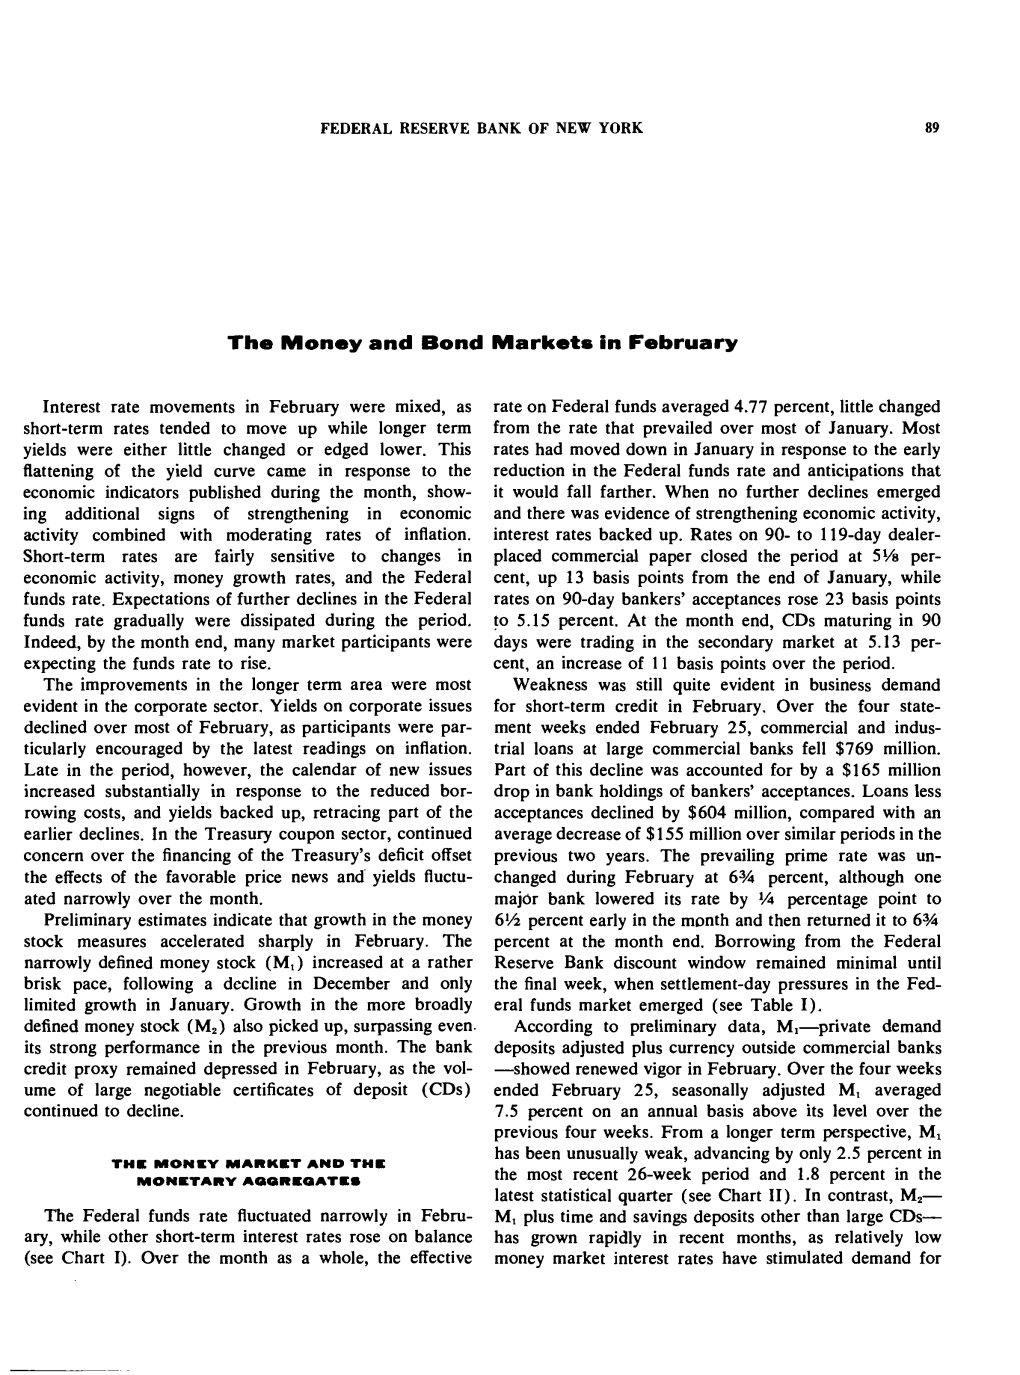 The Money and Bond Markets in February 1976